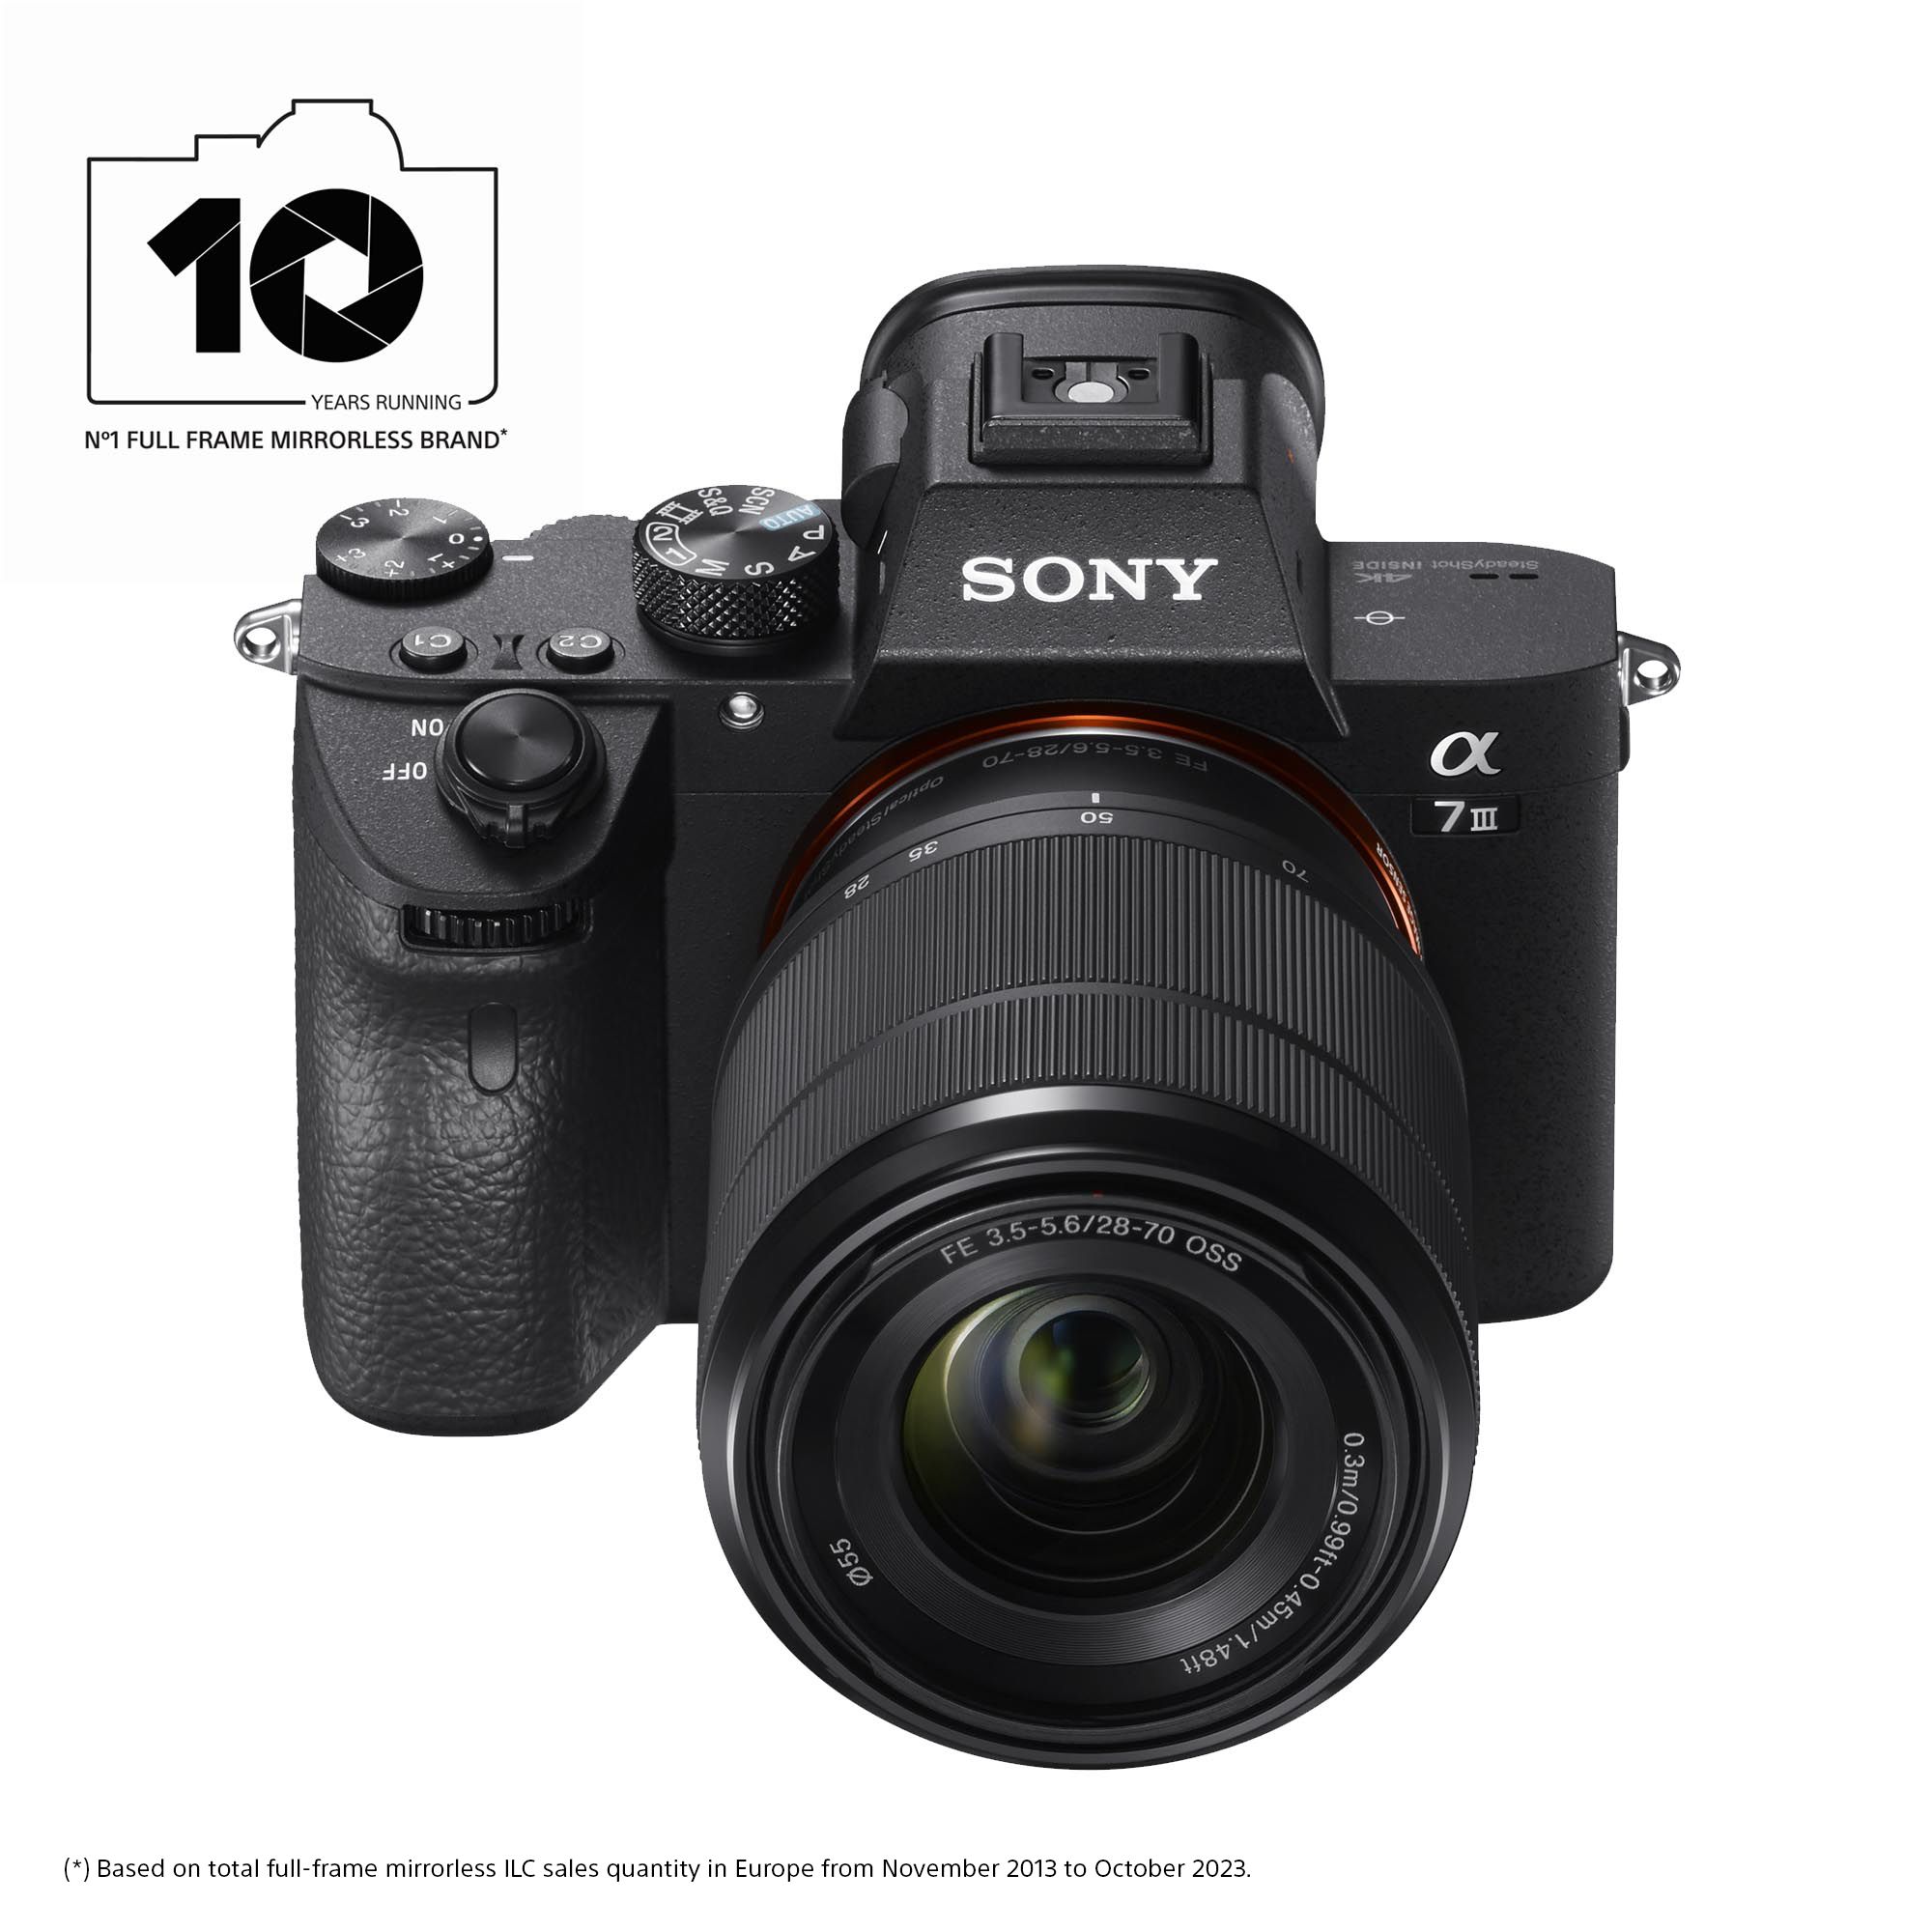 Buy SONY a7 III Mirrorless Camera - Body Only